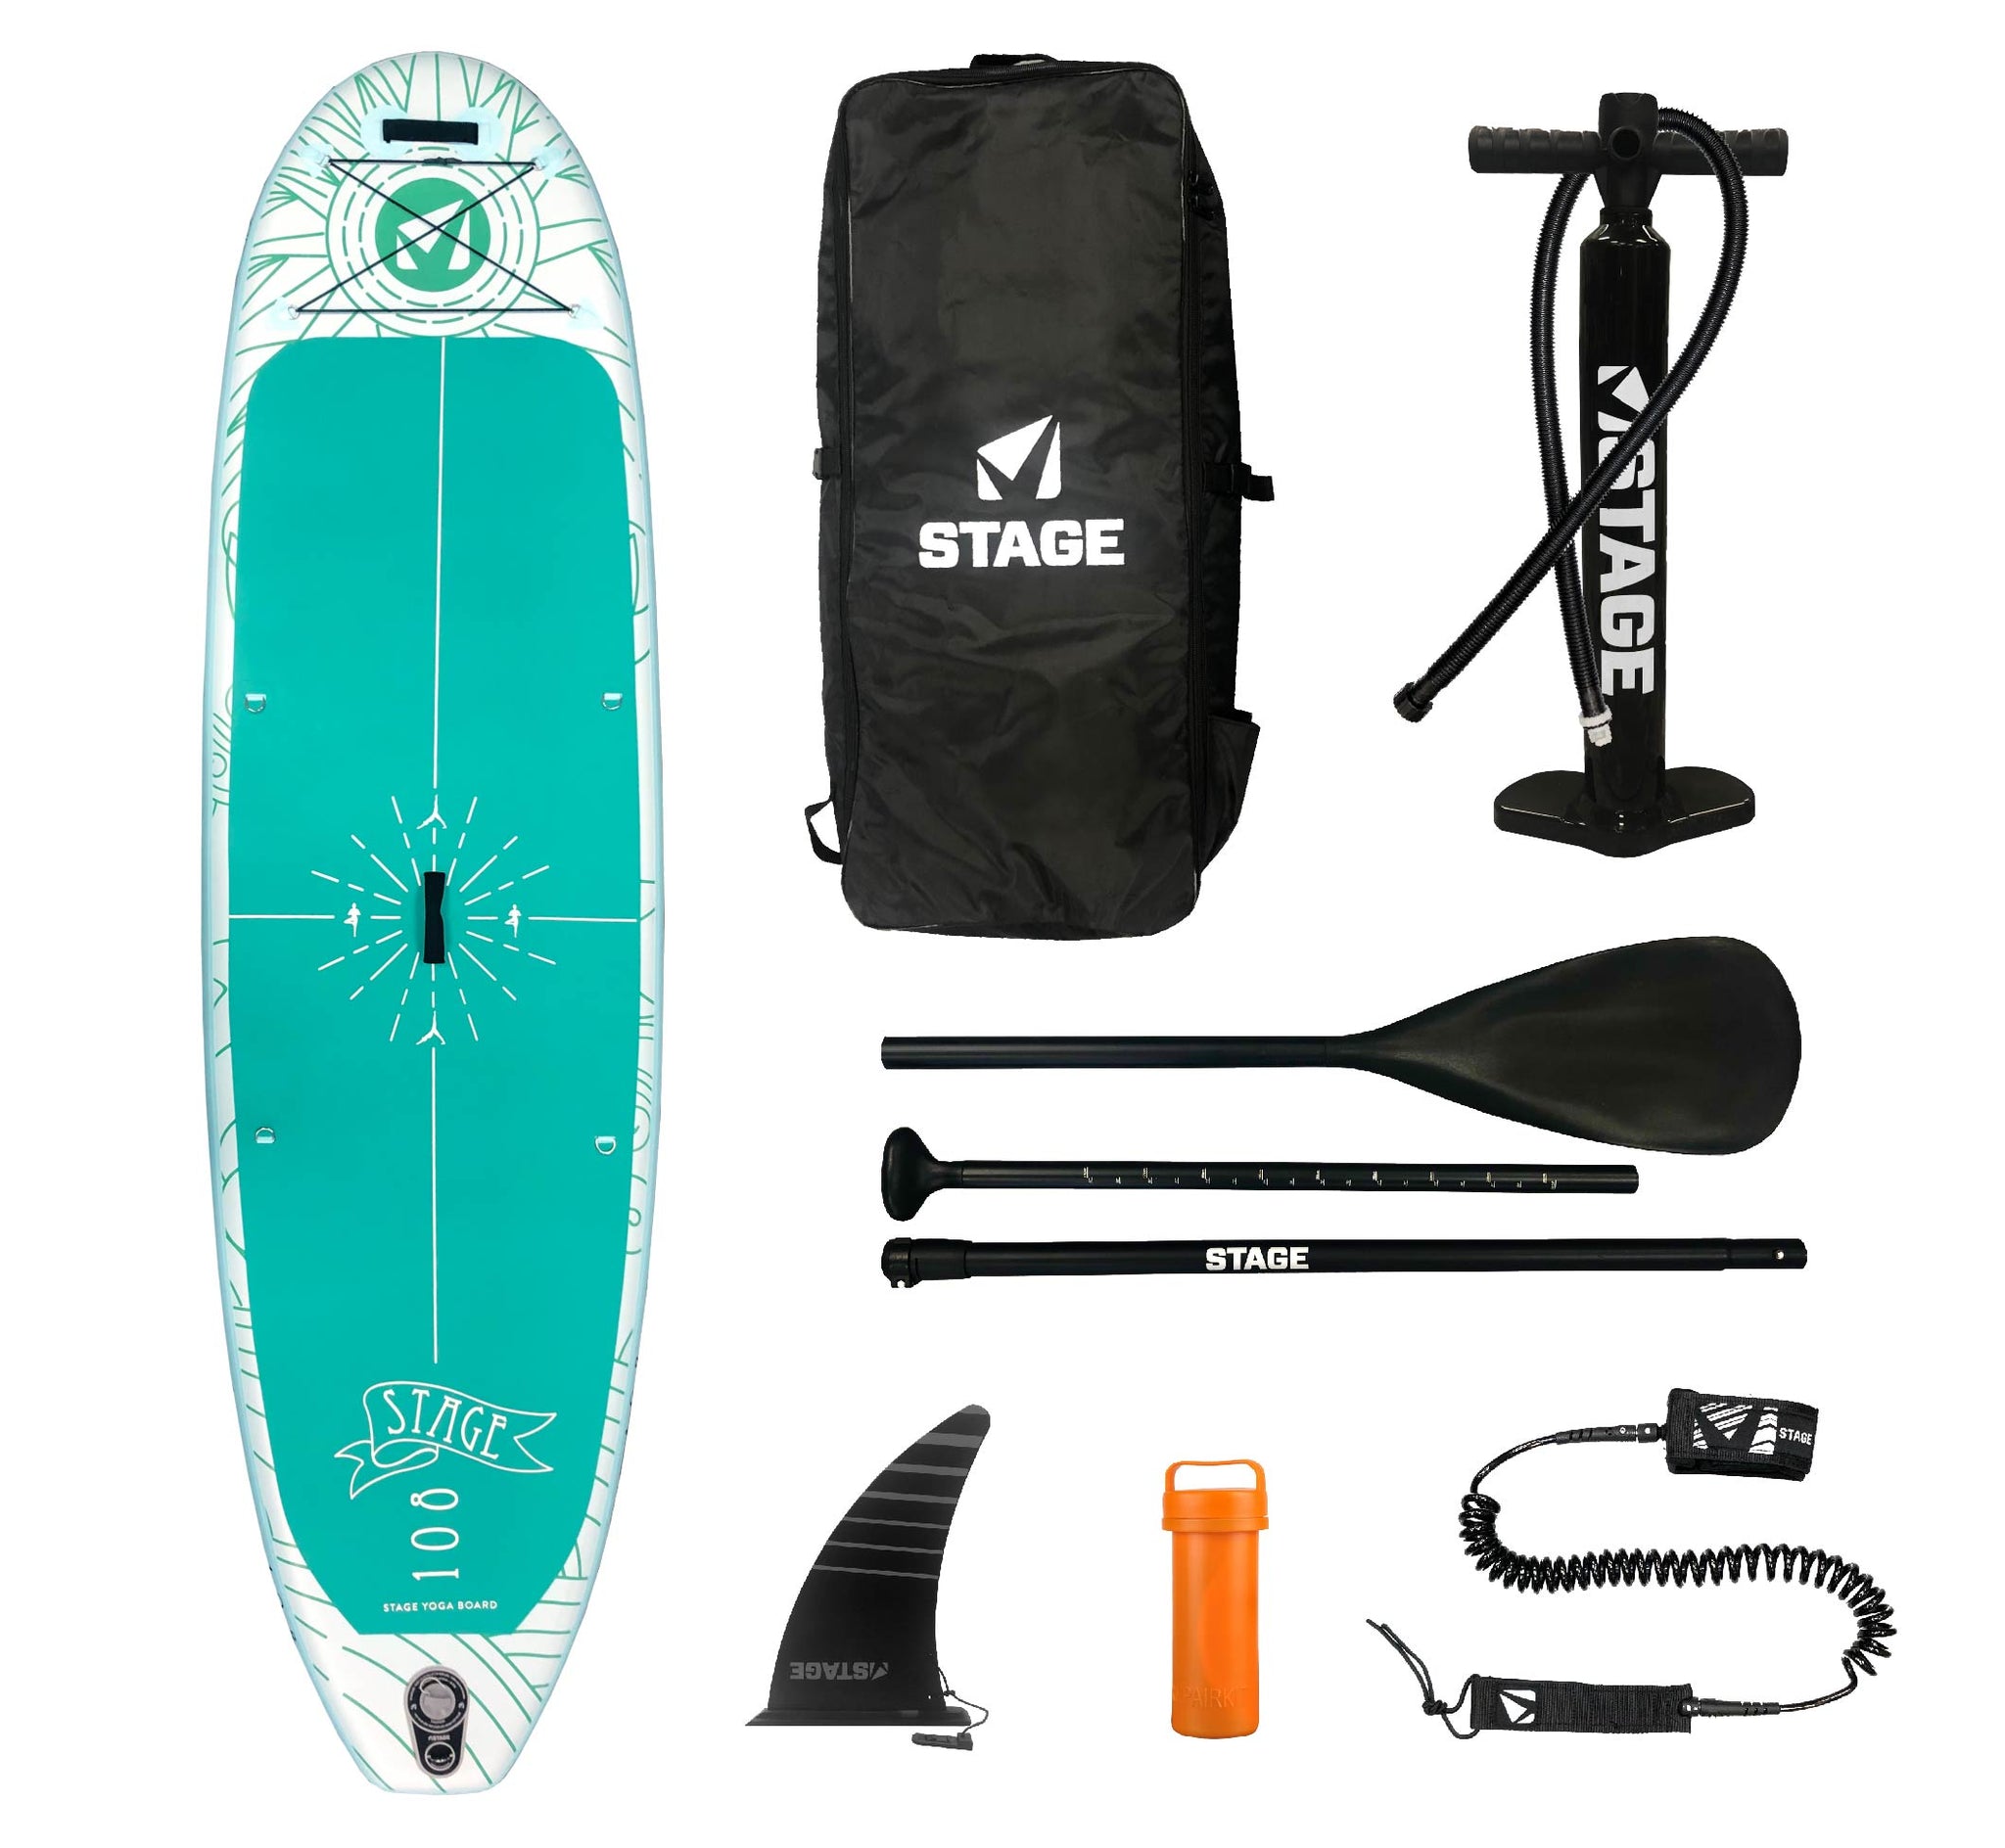 STAGE Y10 Yoga - Inflatable Stand-Up Paddleboard - SUP Board Package (iSUP)